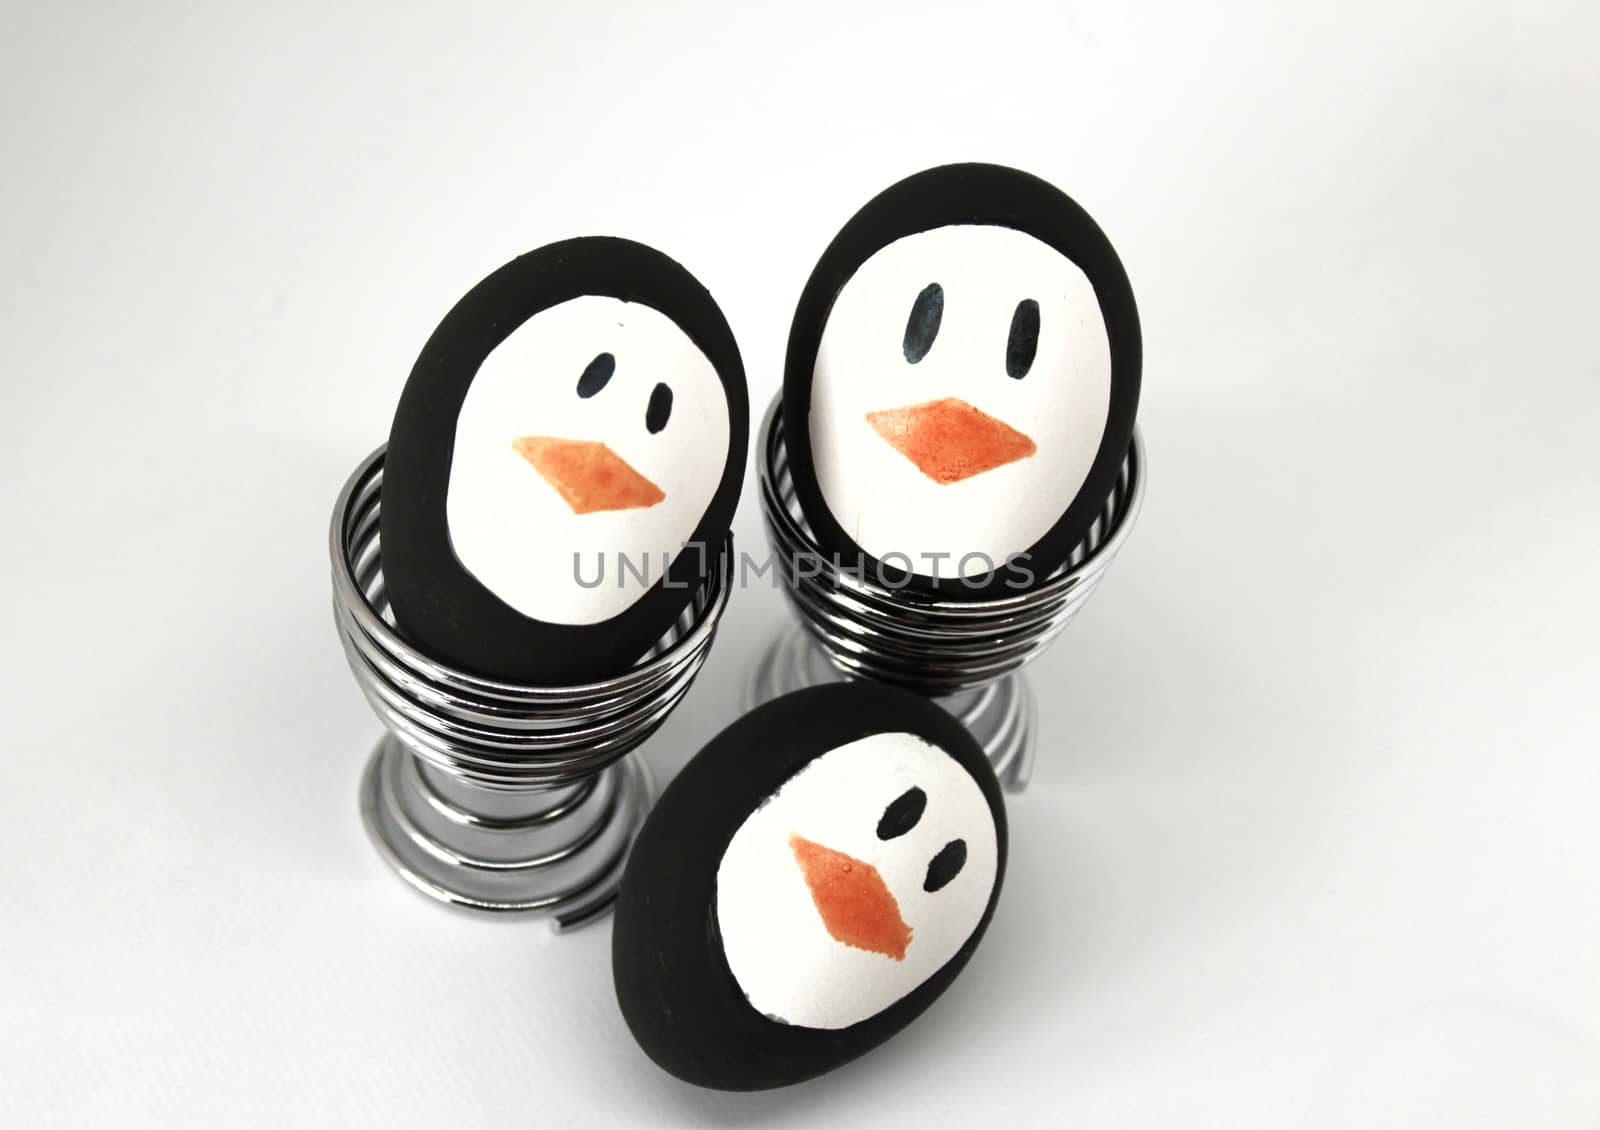 Penguin Easter Eggs made by hand on metal egg cup white background